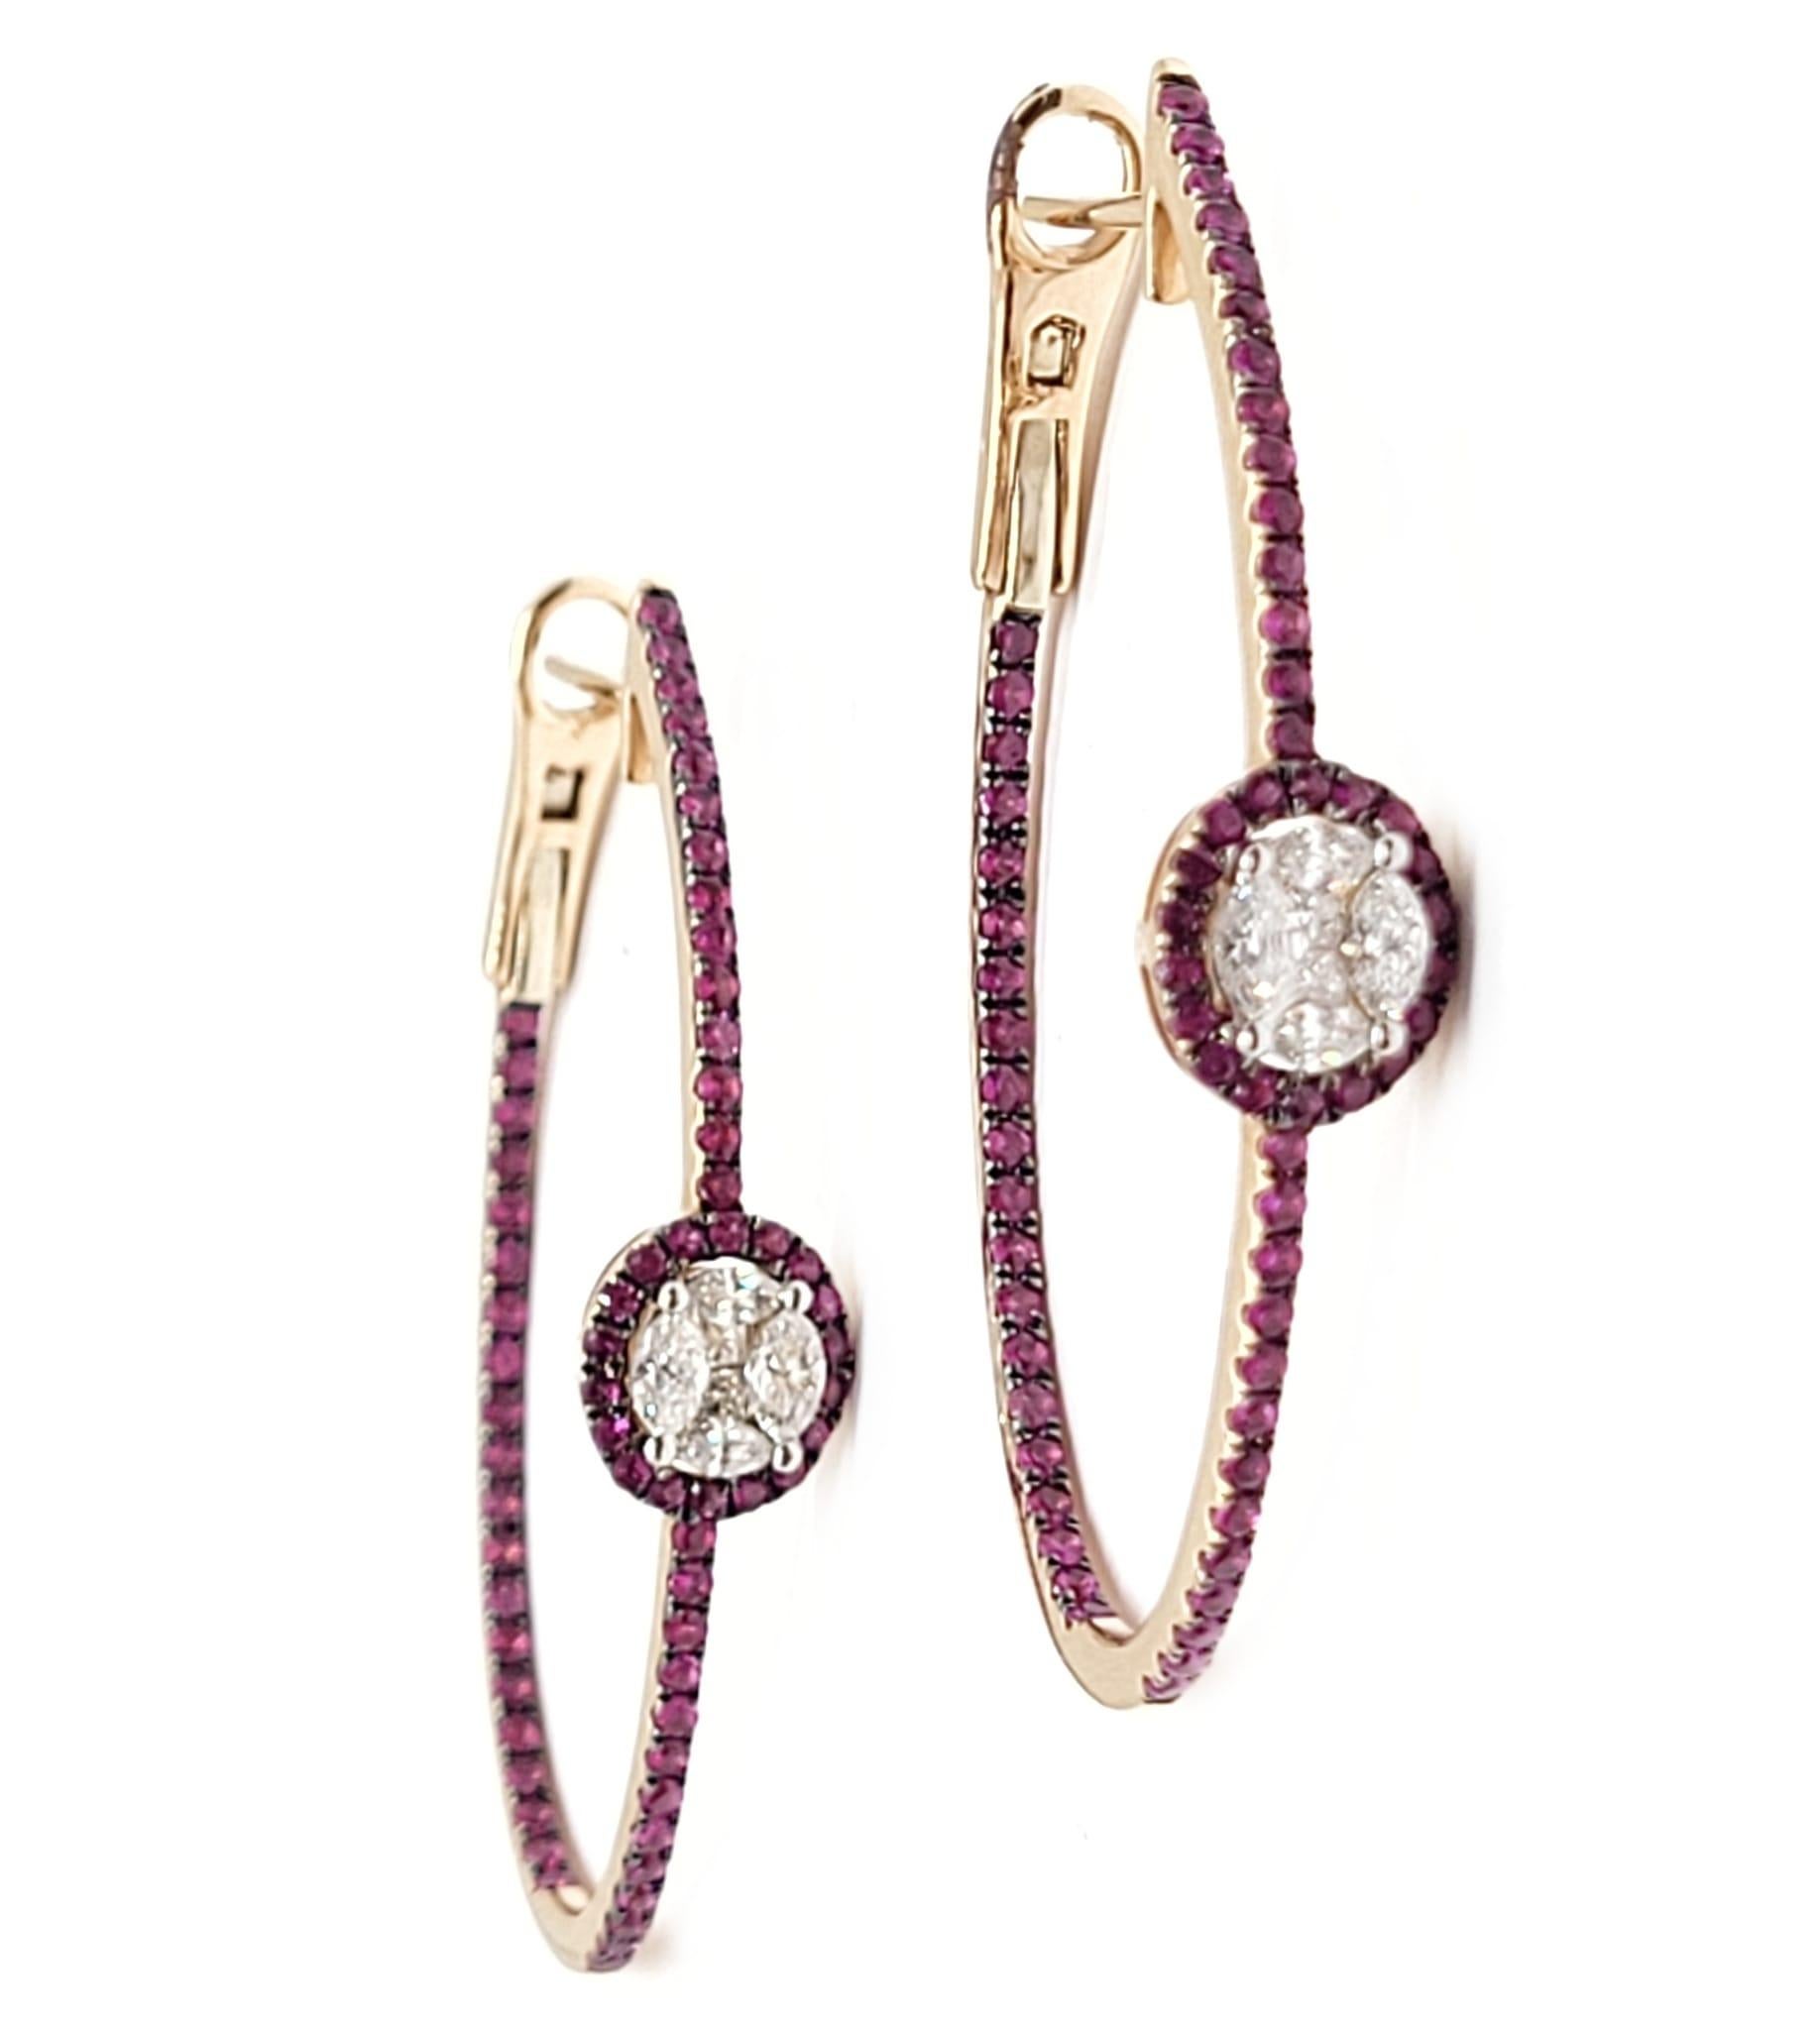 Contemporary Andreoli 1.32 Carat Ruby Diamond 18 Karat Rose Gold Earrings For Sale